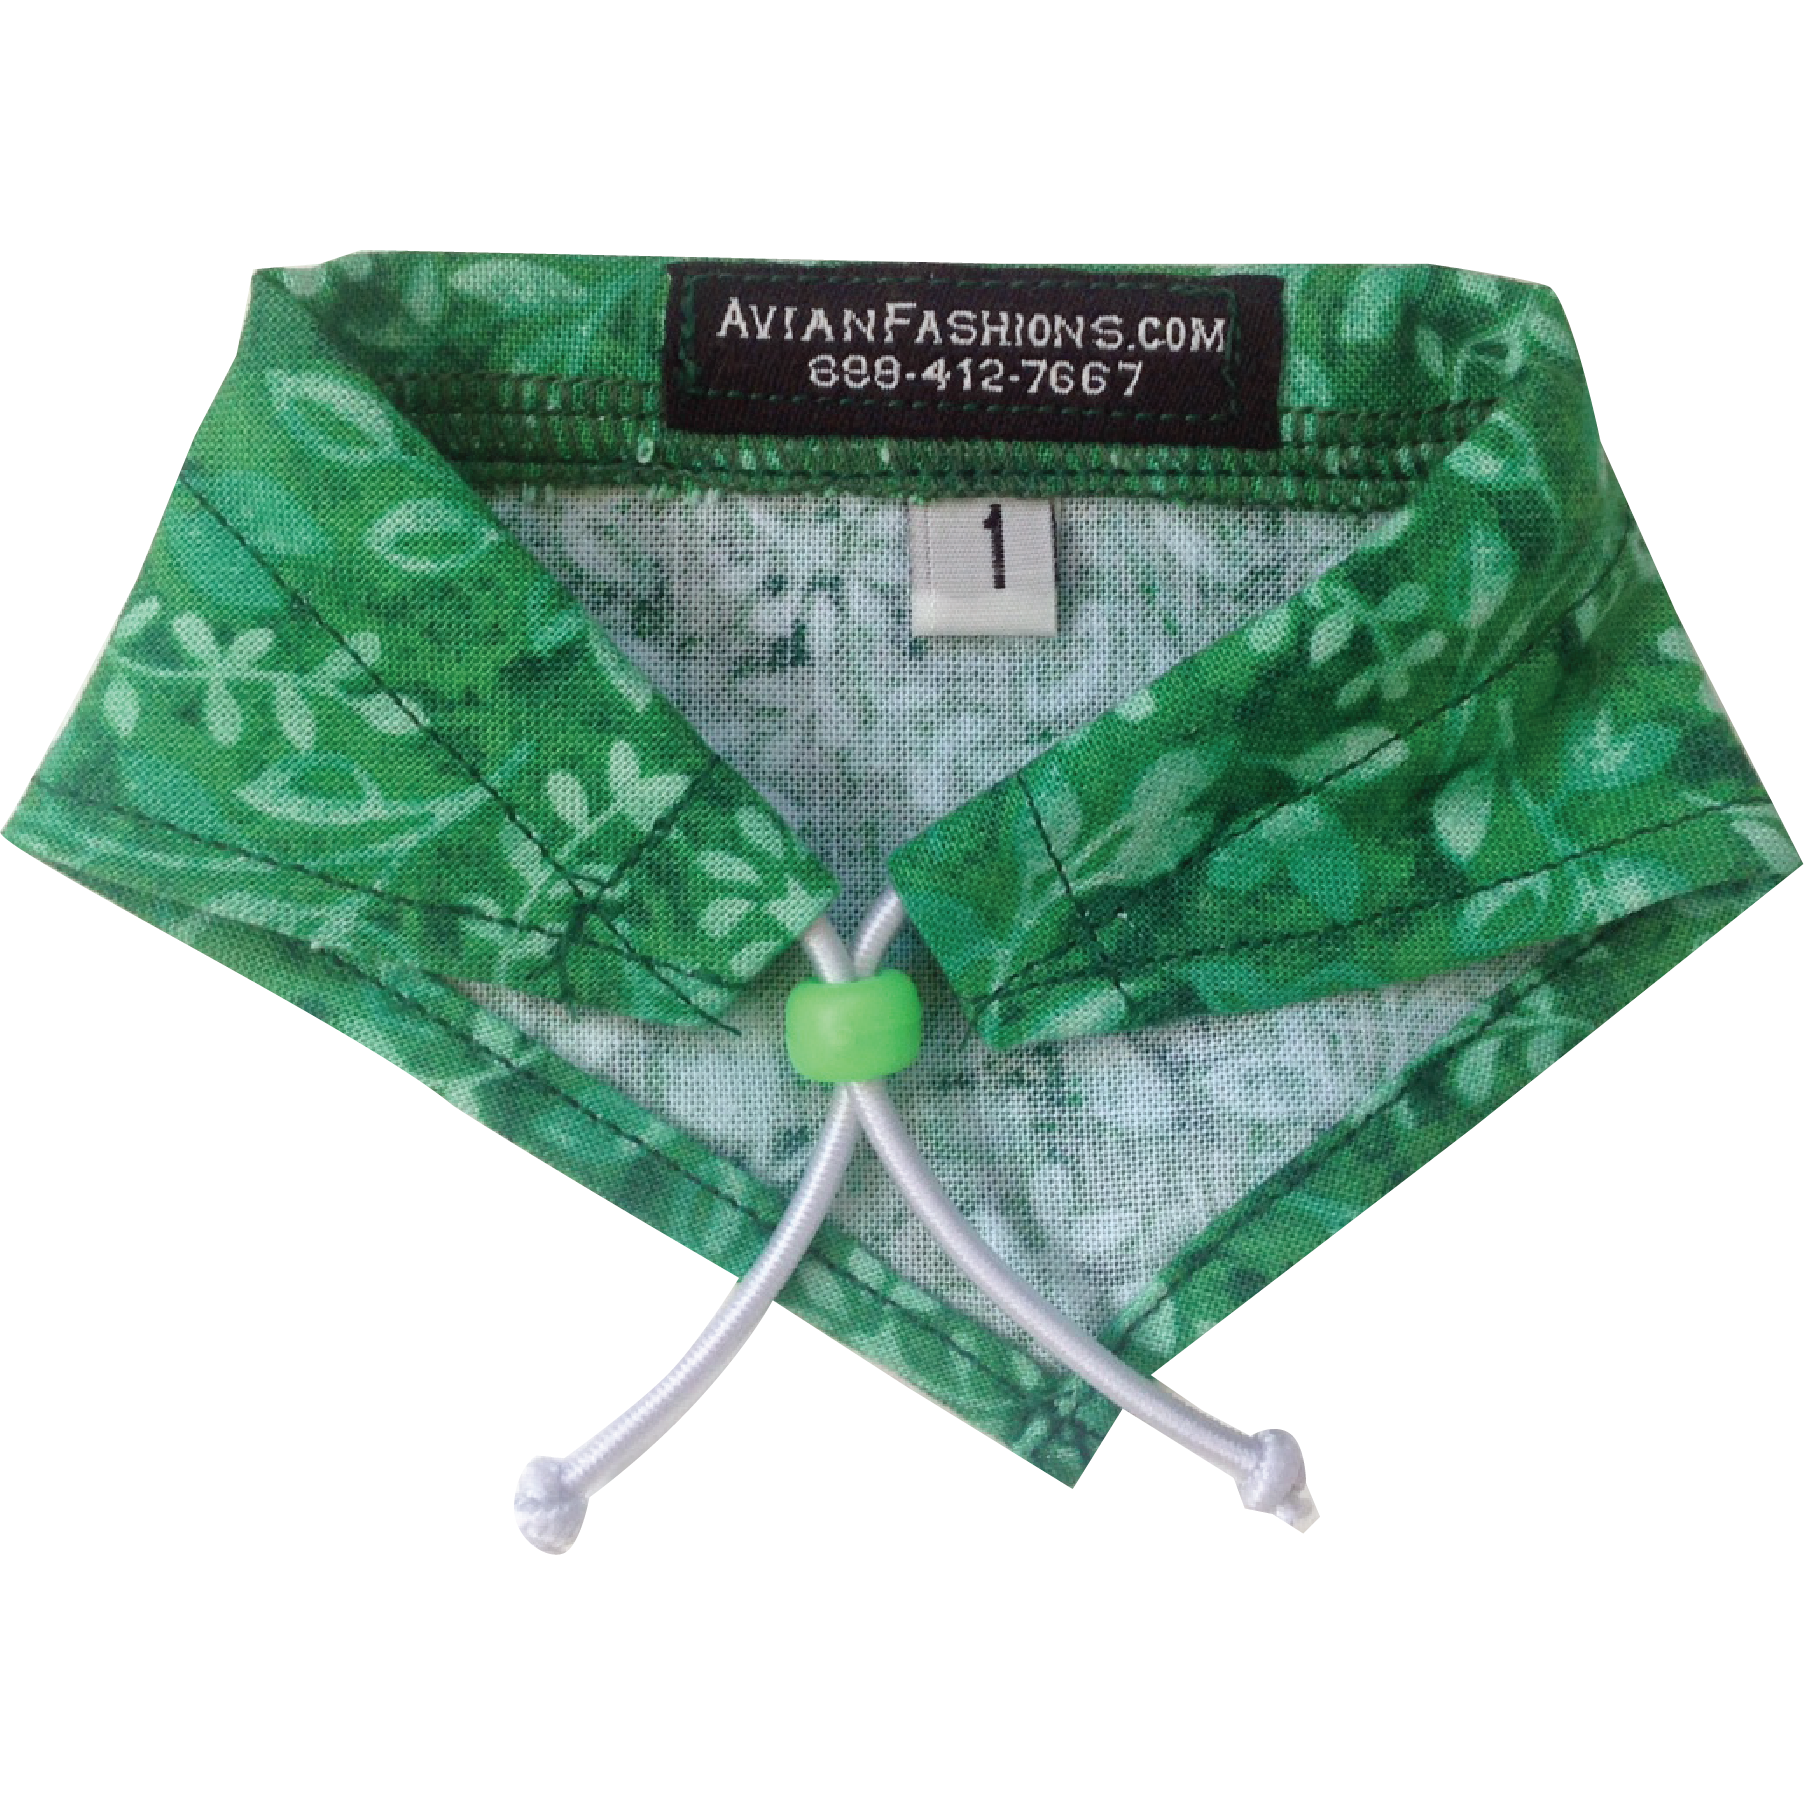 Only 7.98 usd for Avian Fashions Bandana - Green Floral Online at the Shop